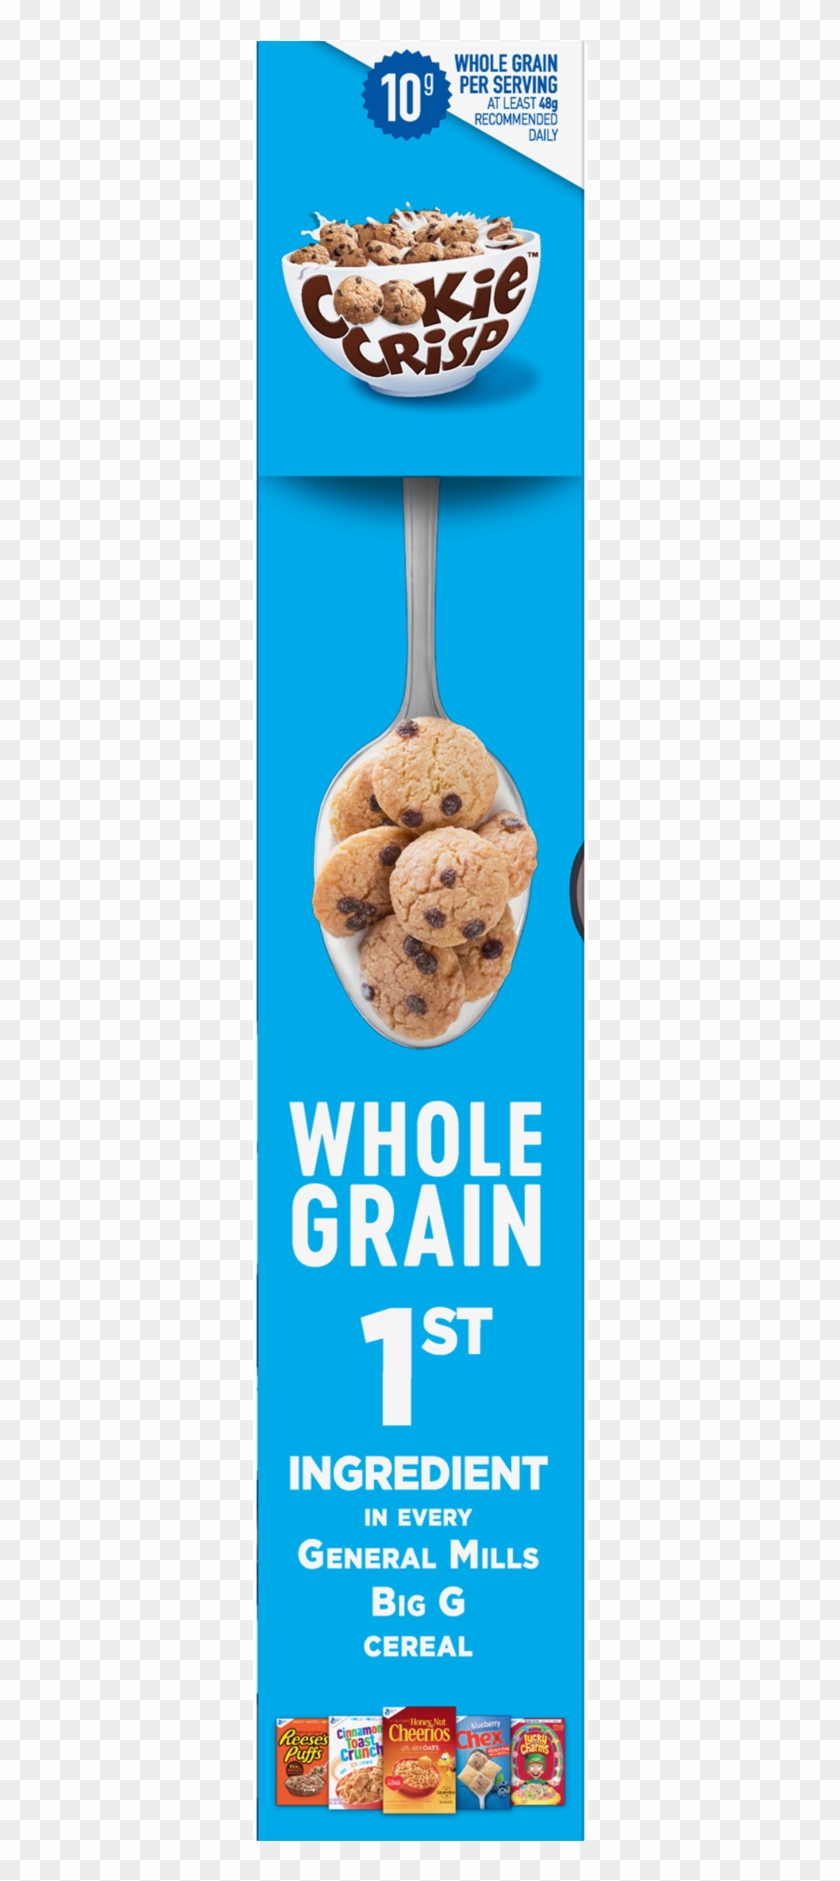 Cookie Crisp Chocolate Chip Cookie Flavored Cereal, - Chocolate Chip Cookie #1744282